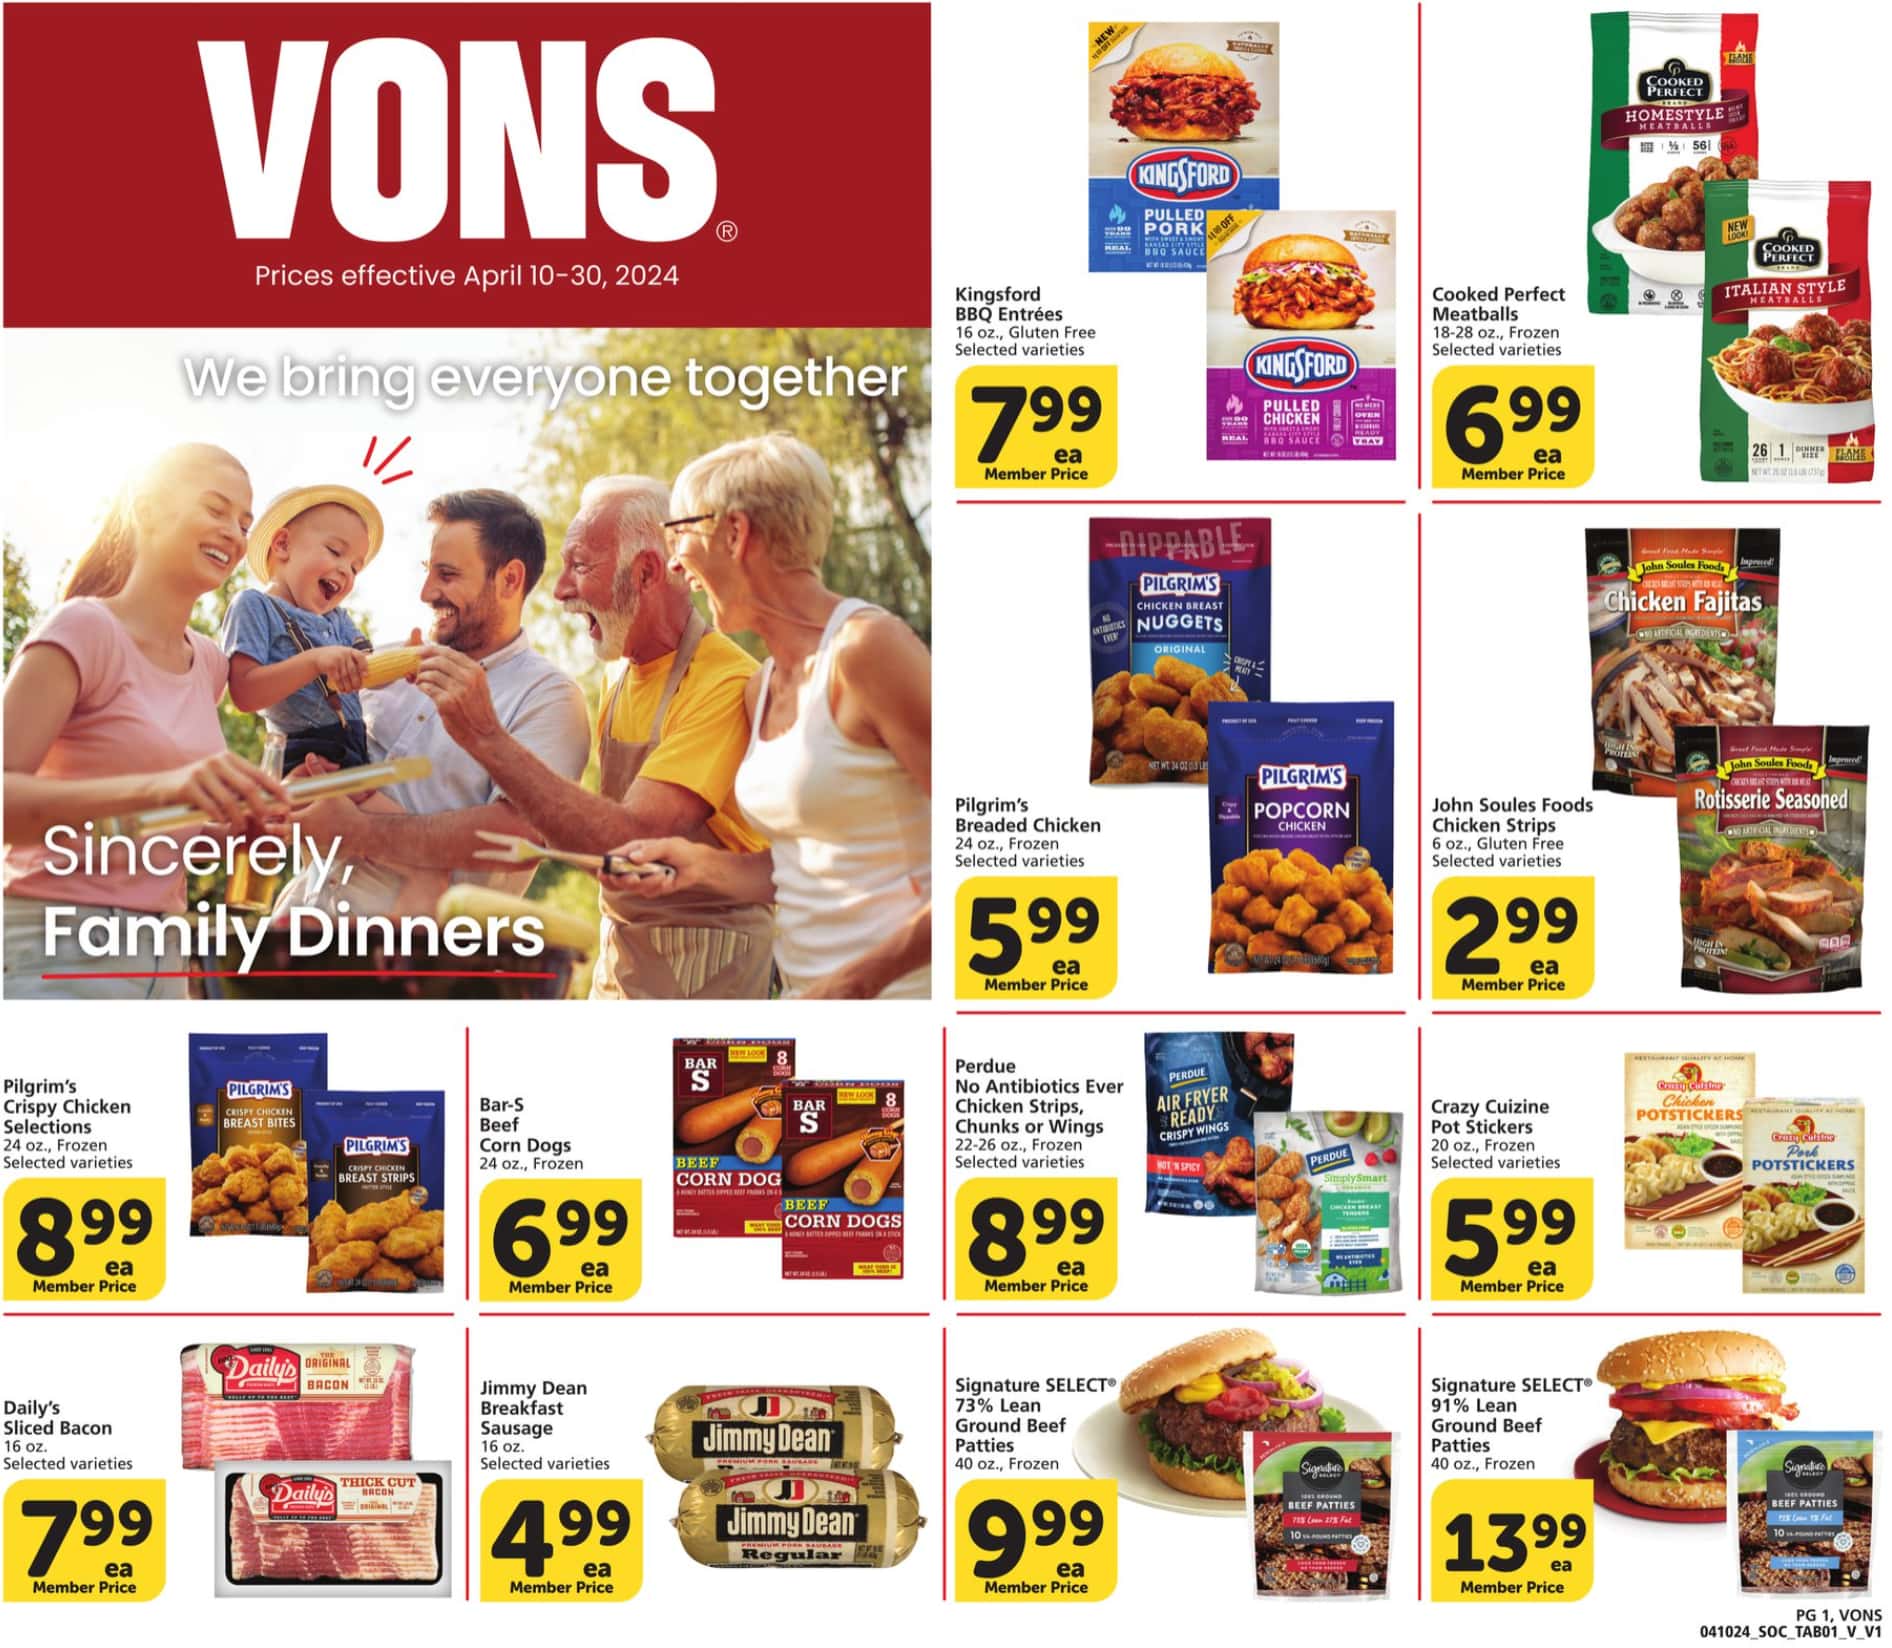 Vons_weekly_ad_040924_01